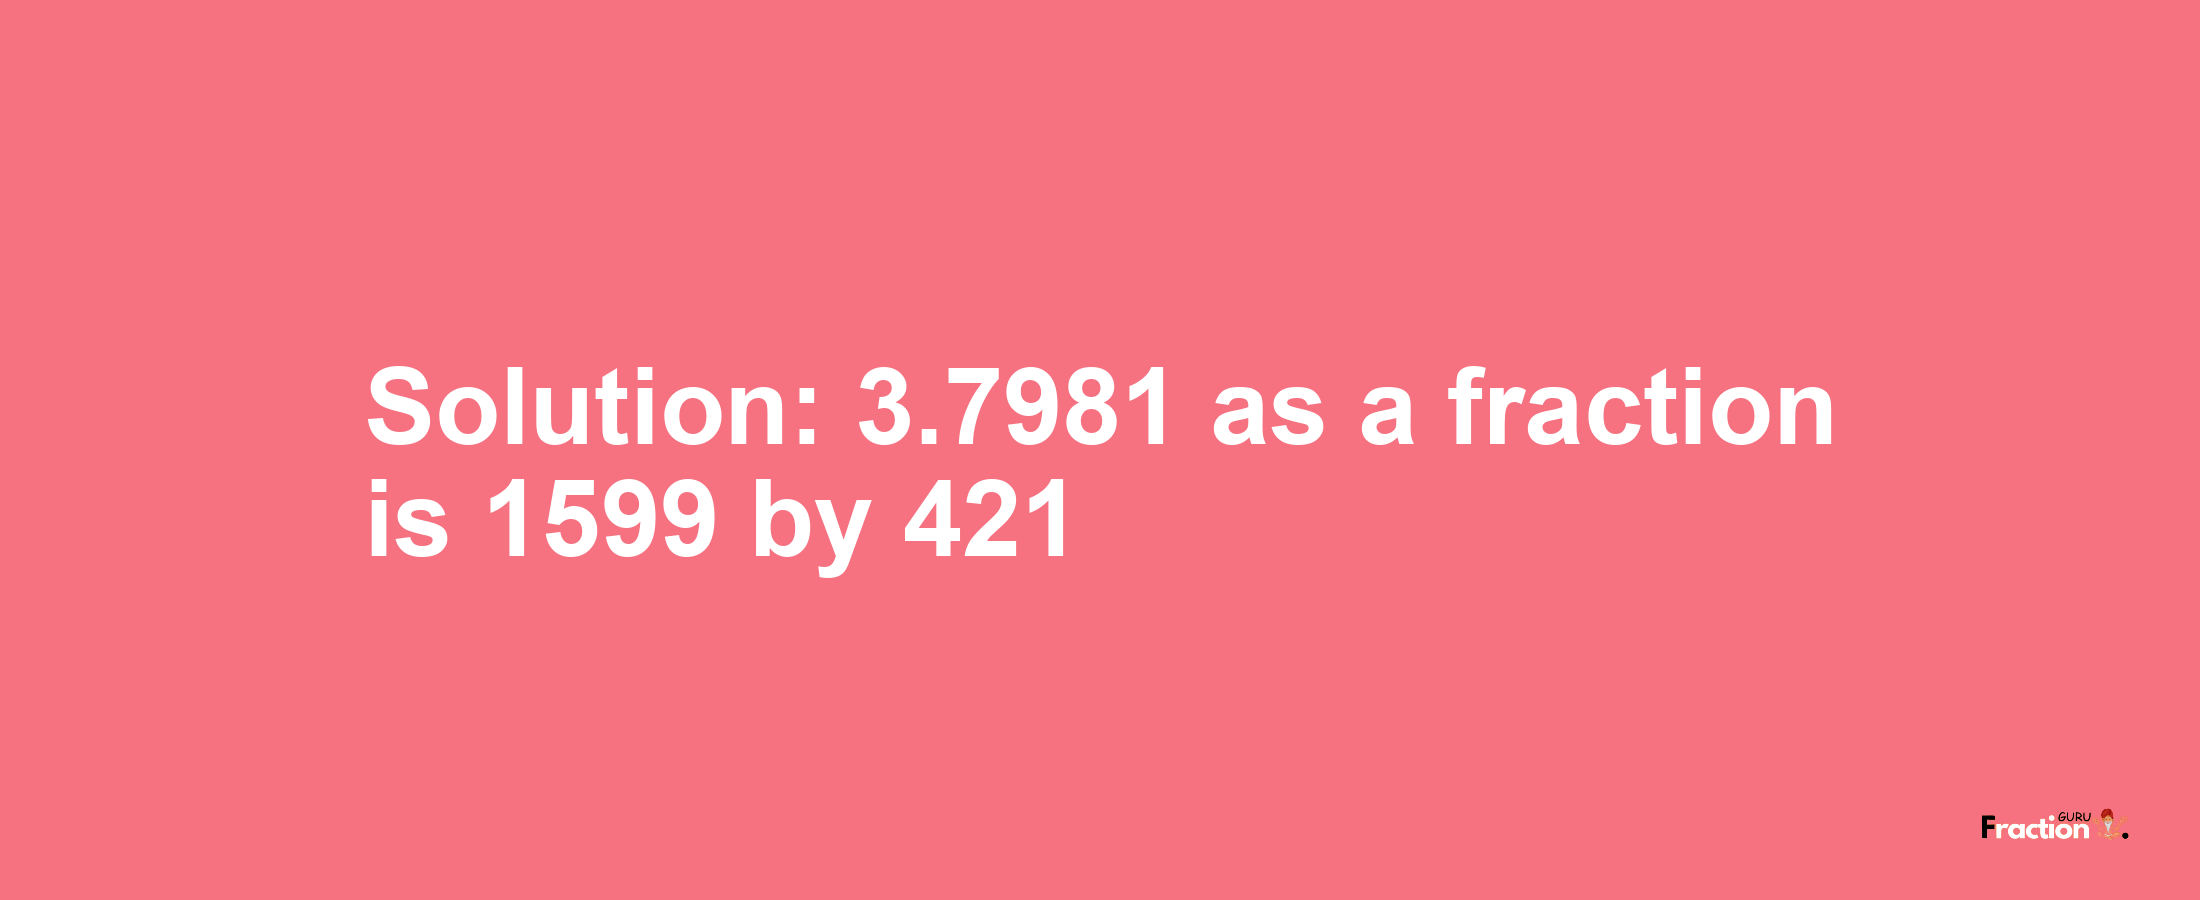 Solution:3.7981 as a fraction is 1599/421